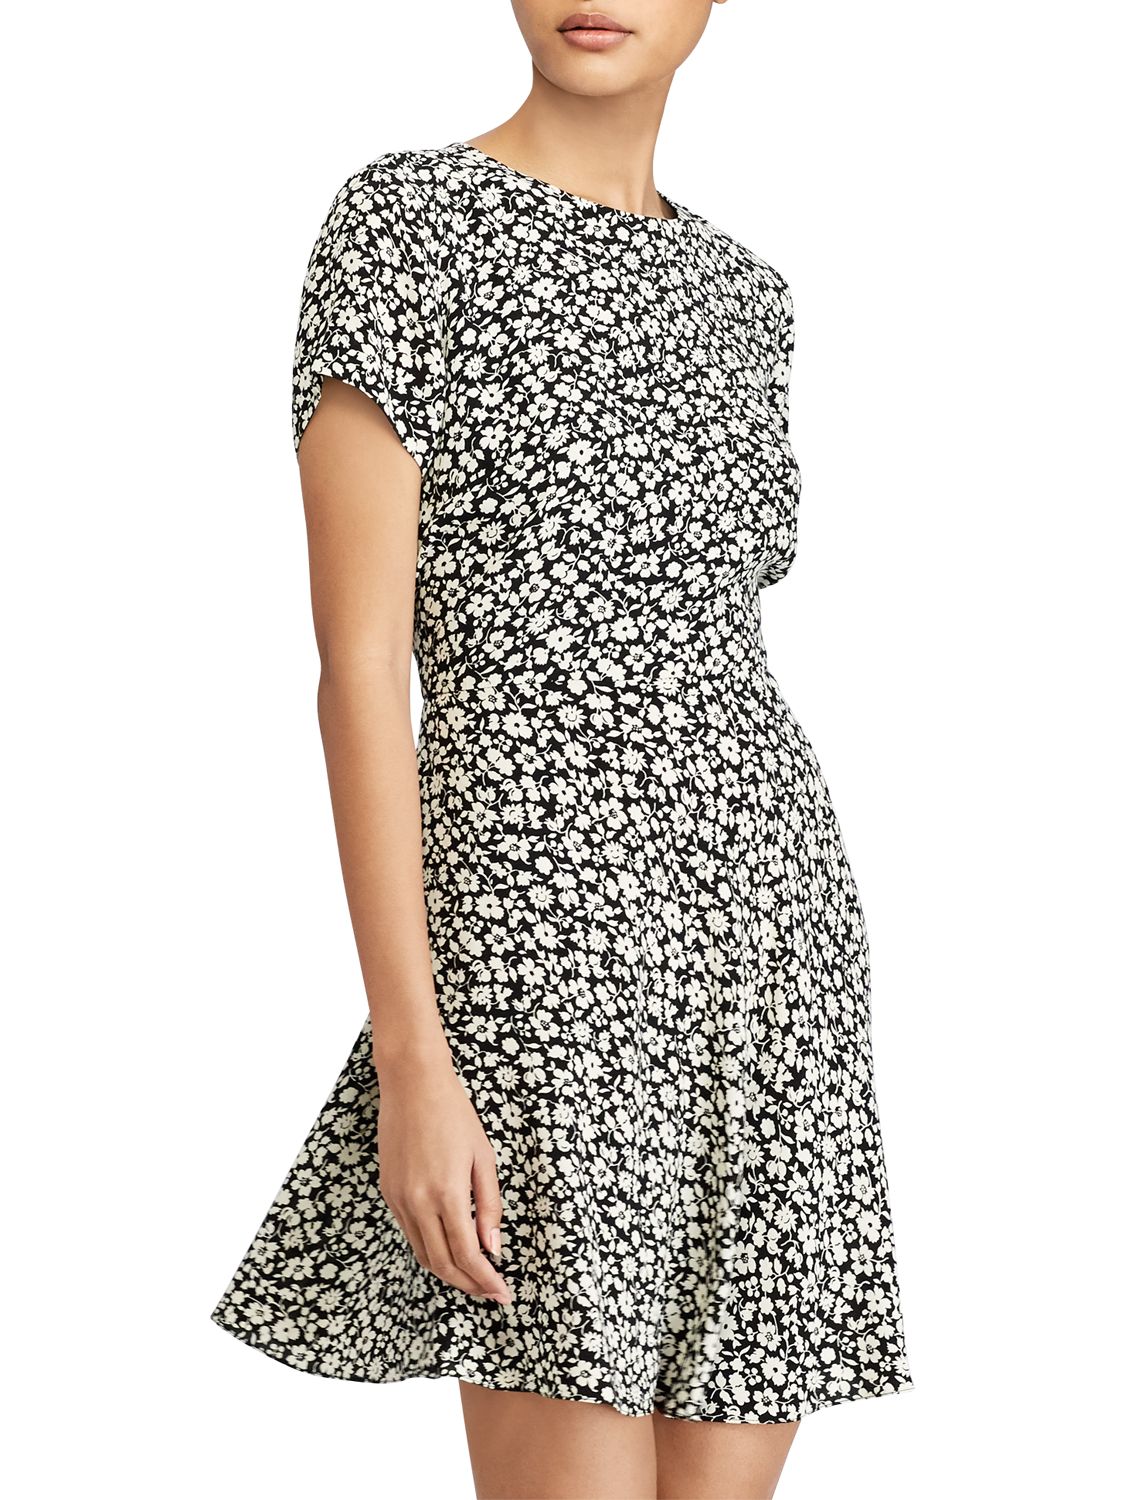 Polo Ralph Lauren Fit-And-Flare Floral Dress, Canne Floral Print